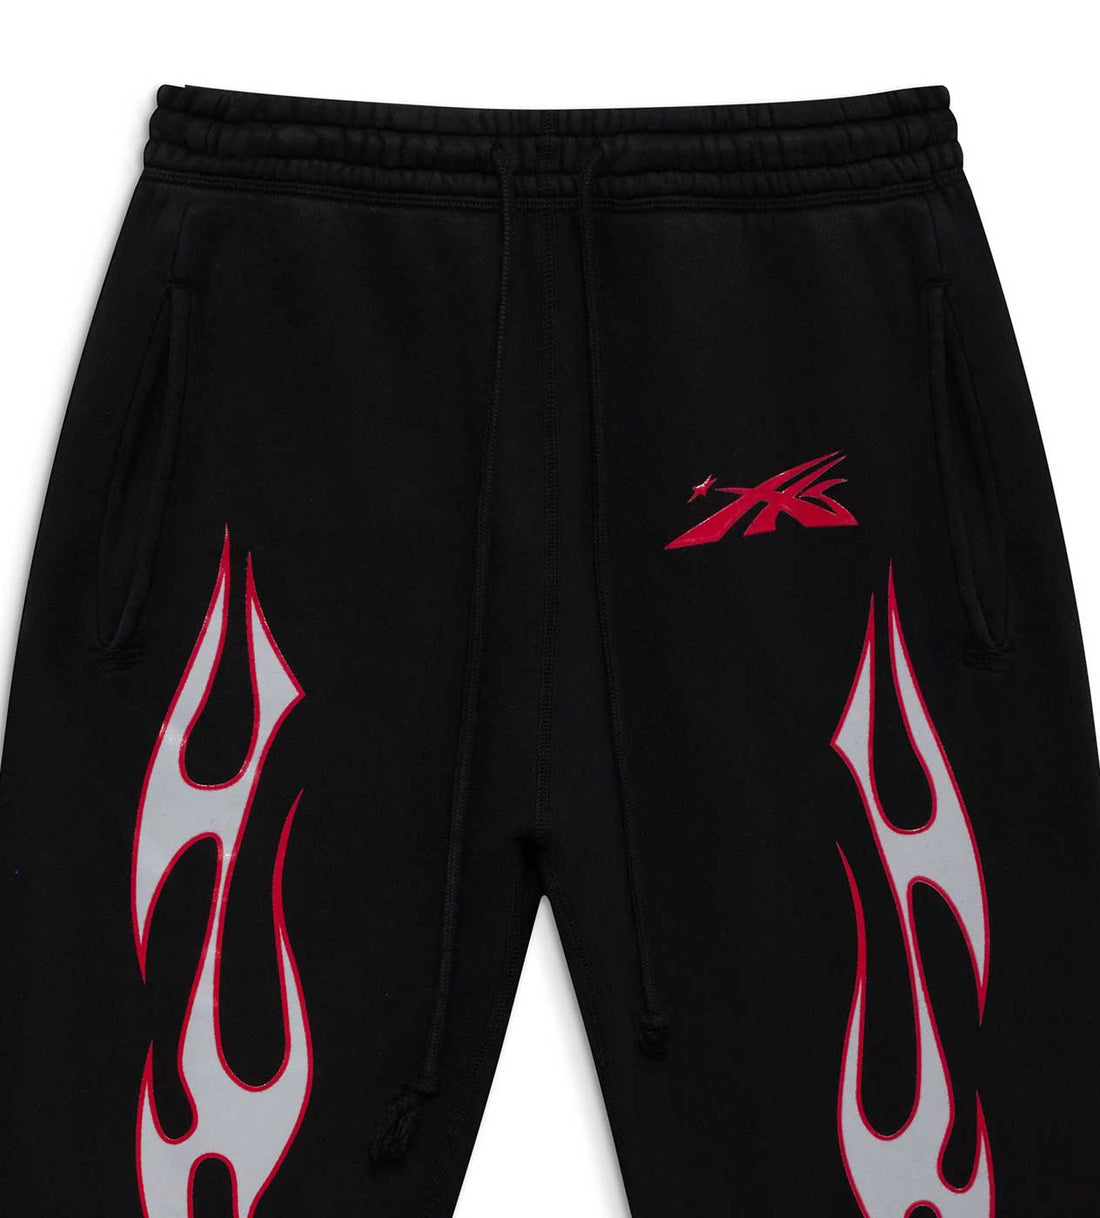 Hellstar Sports Future Flame Sweatpants Black detailed front view view